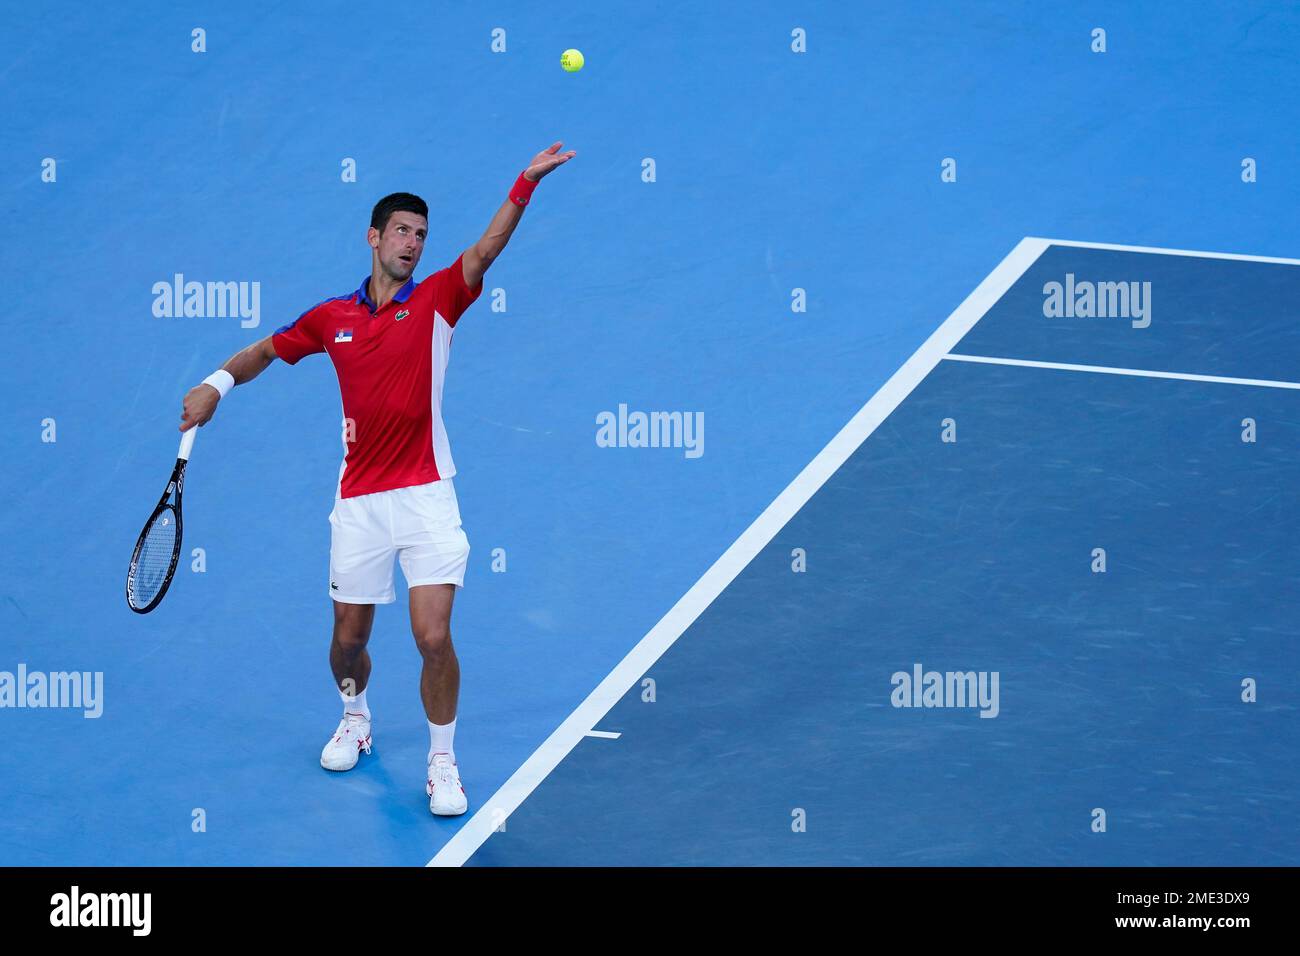 Novak Djokovic, of Serbia, serves to Alejandro Davidovich Fokina, of Spain, during the third round of the mens tennis competition at the 2020 Summer Olympics, Wednesday, July 28, 2021, in Tokyo, Japan